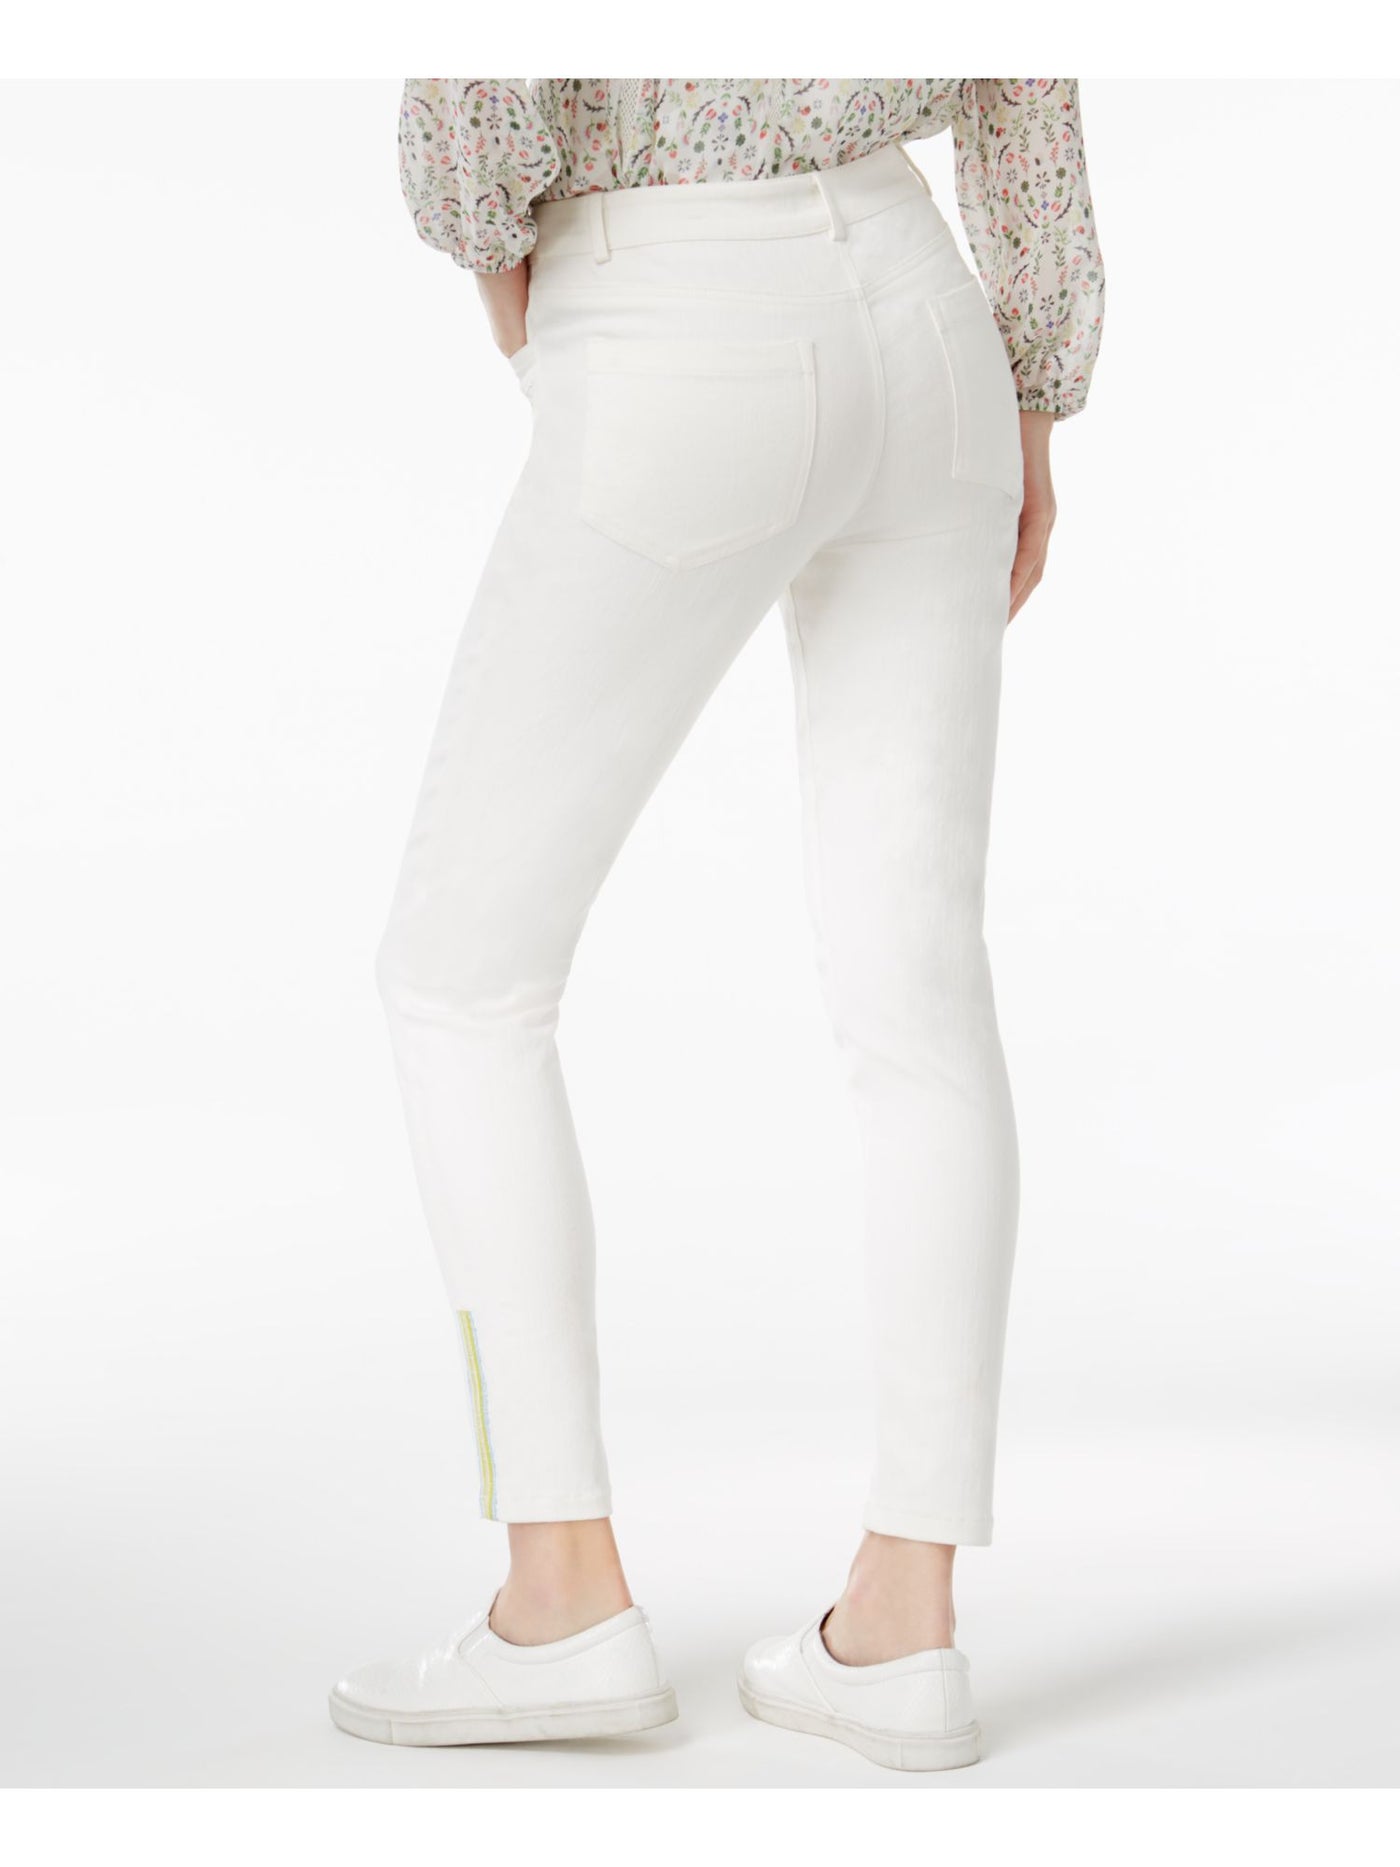 CYNTHIA ROWLEY Womens White Embroidered Skinny Jeans Size: 2